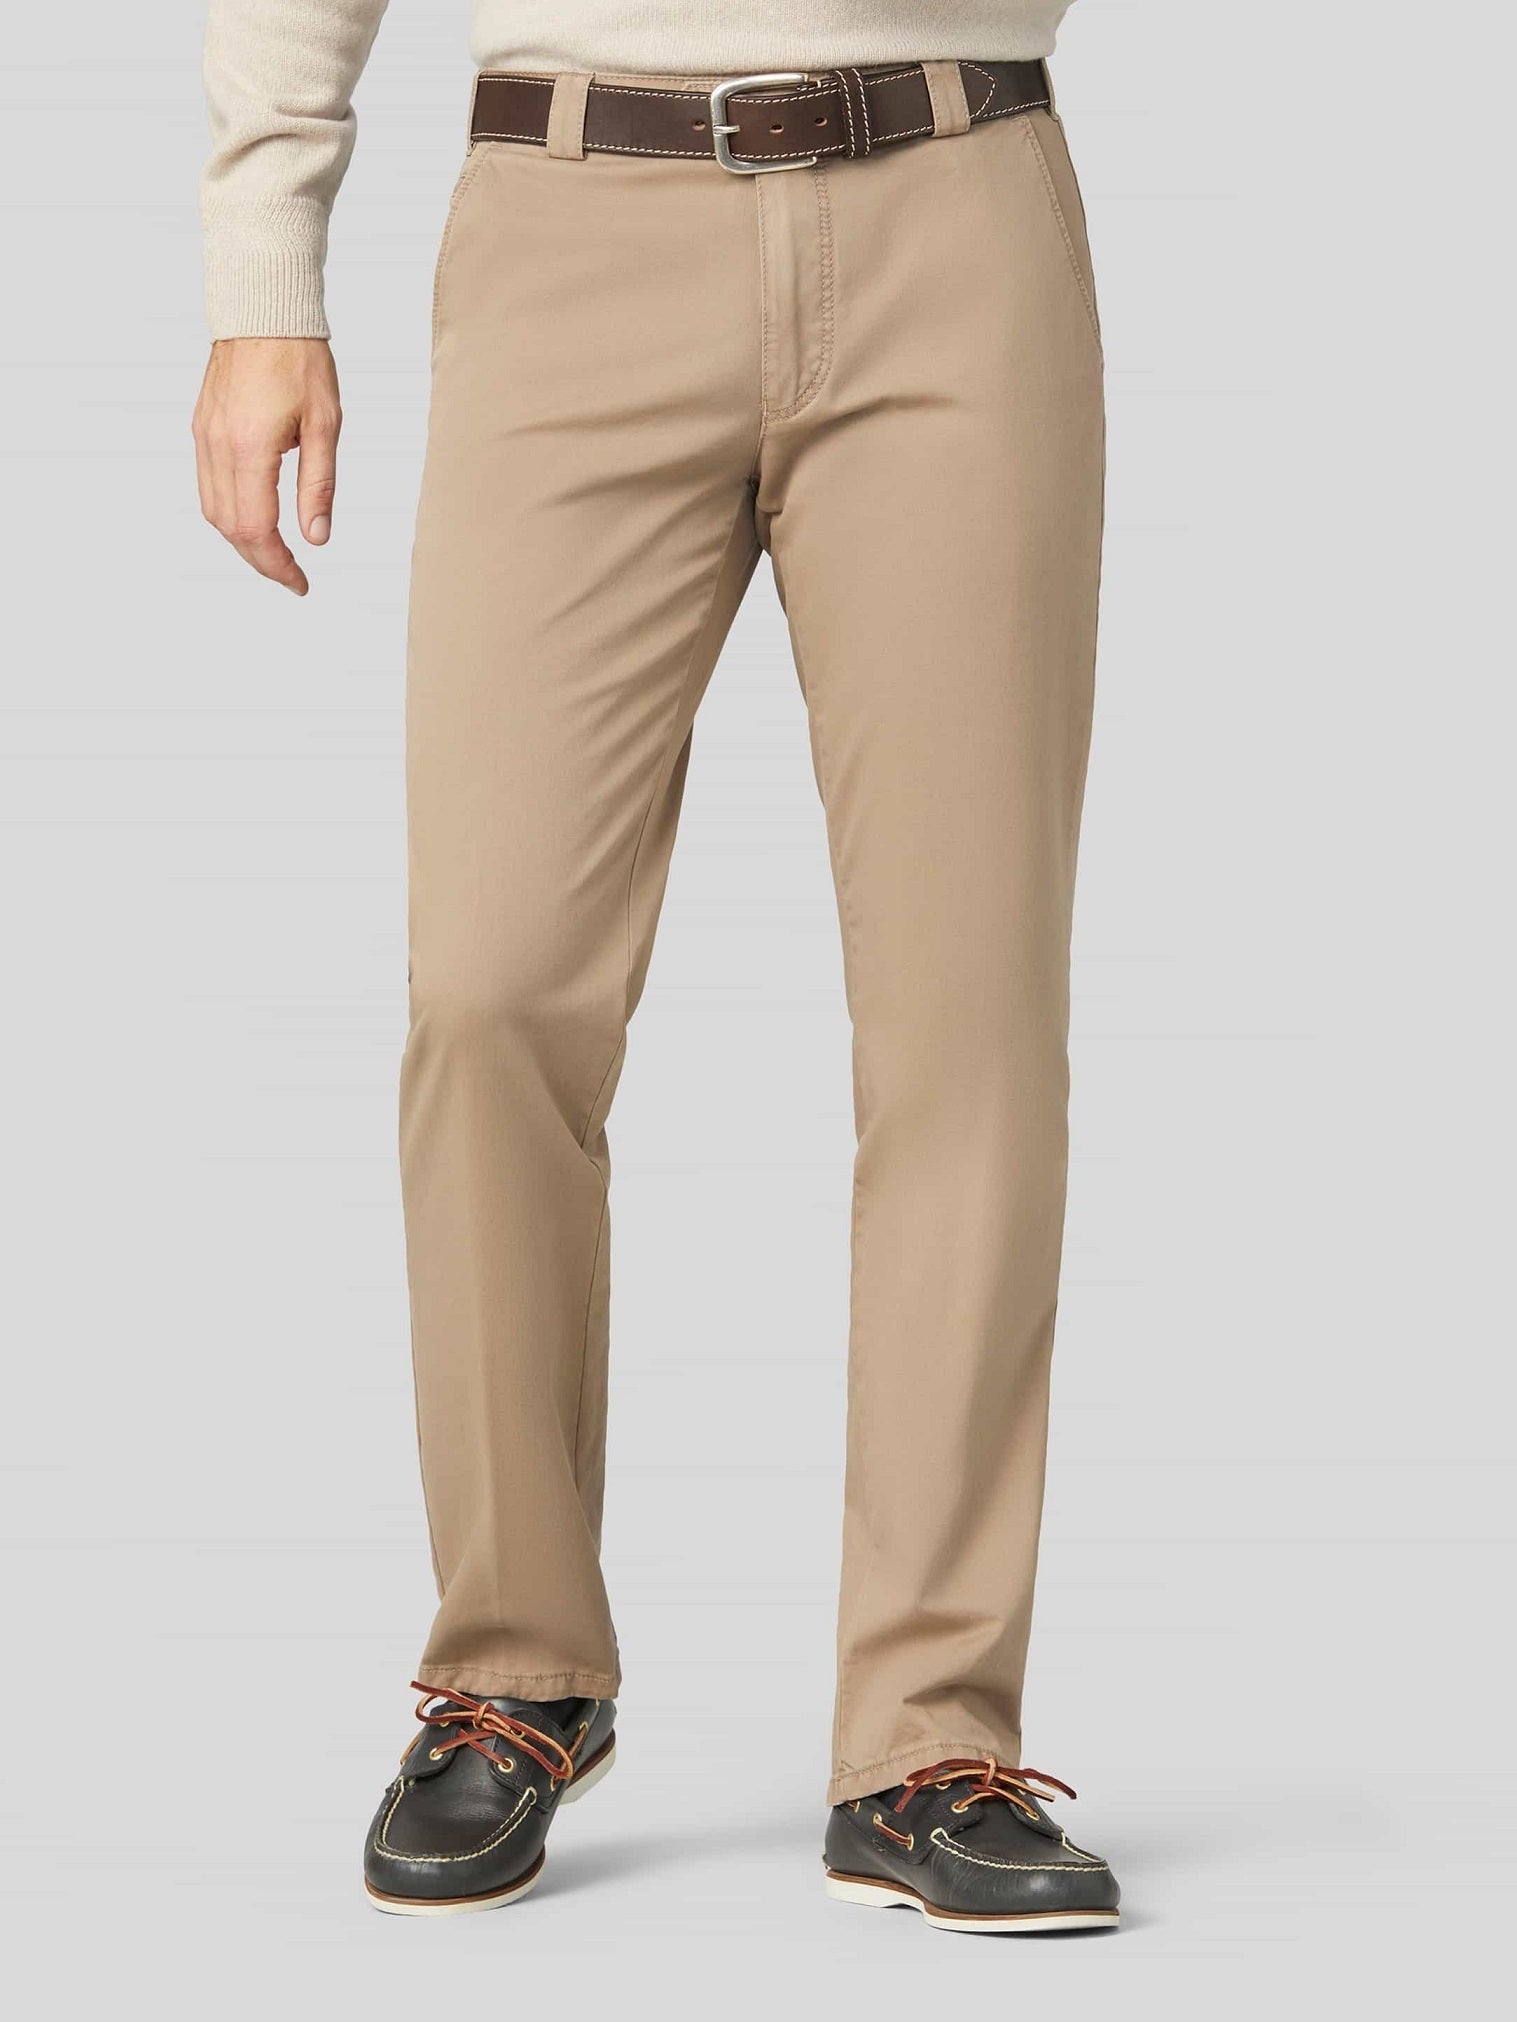 30% OFF MEYER Trousers - Roma 316 Luxury Cotton Chinos - Beige - Size 30 REG